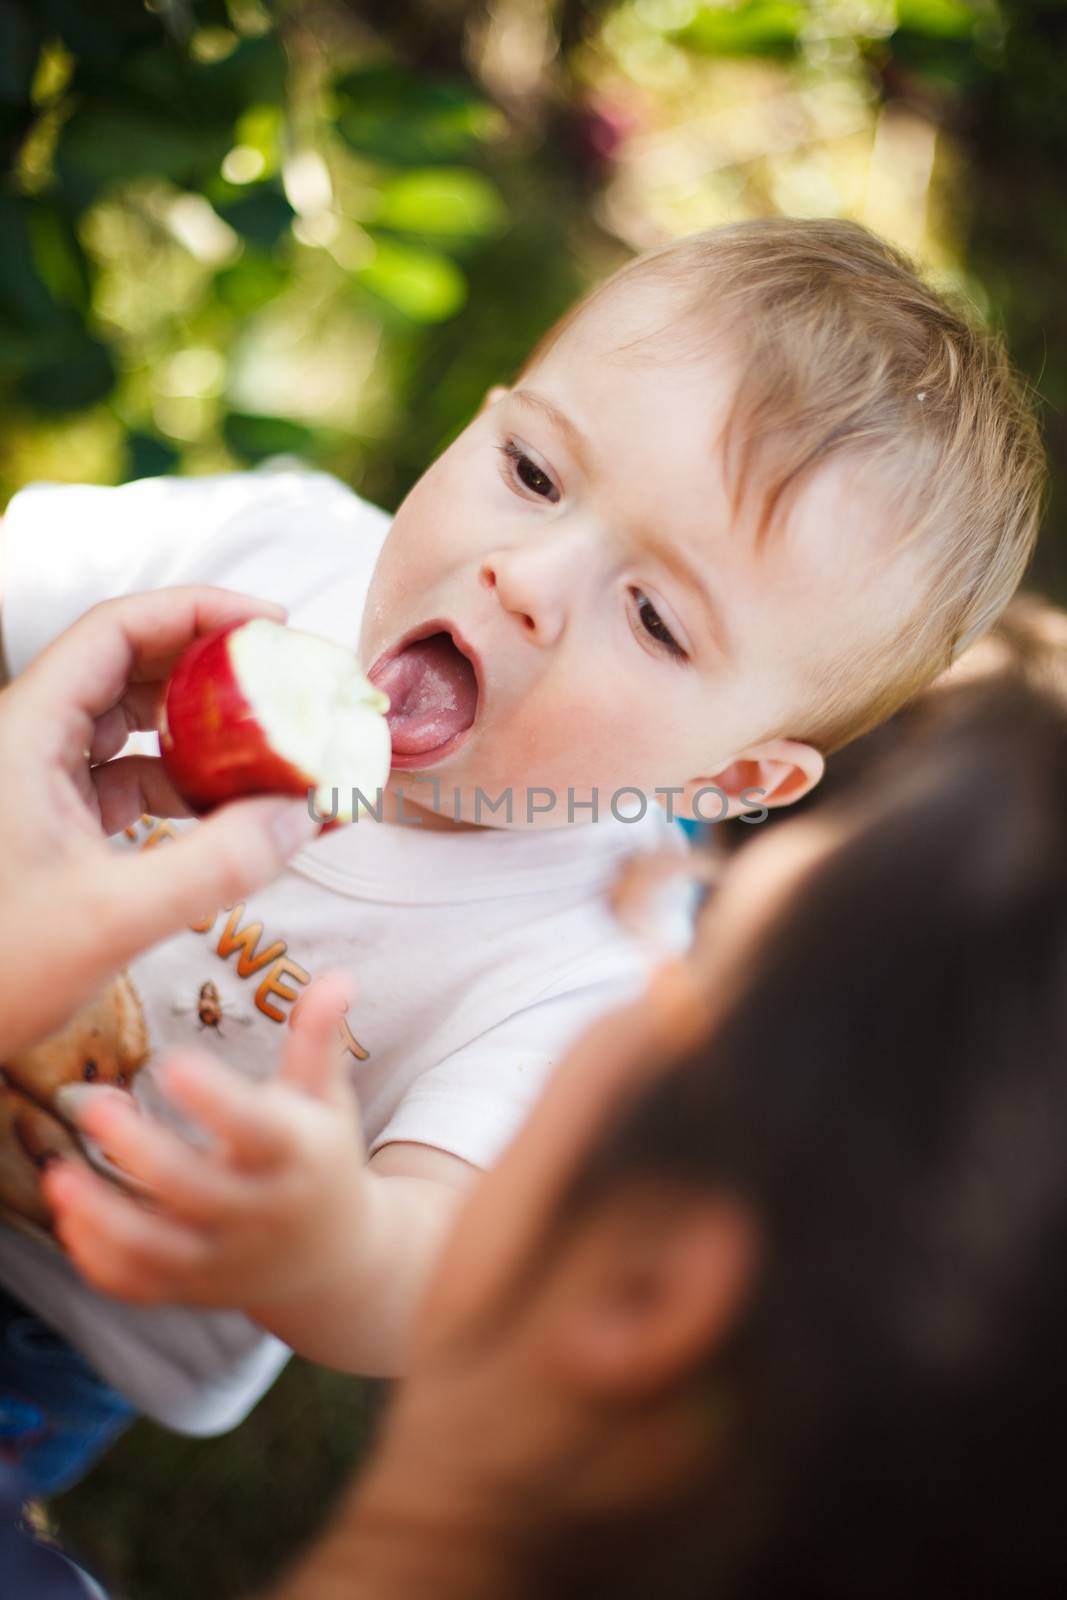 Mother helping her baby eat an apple